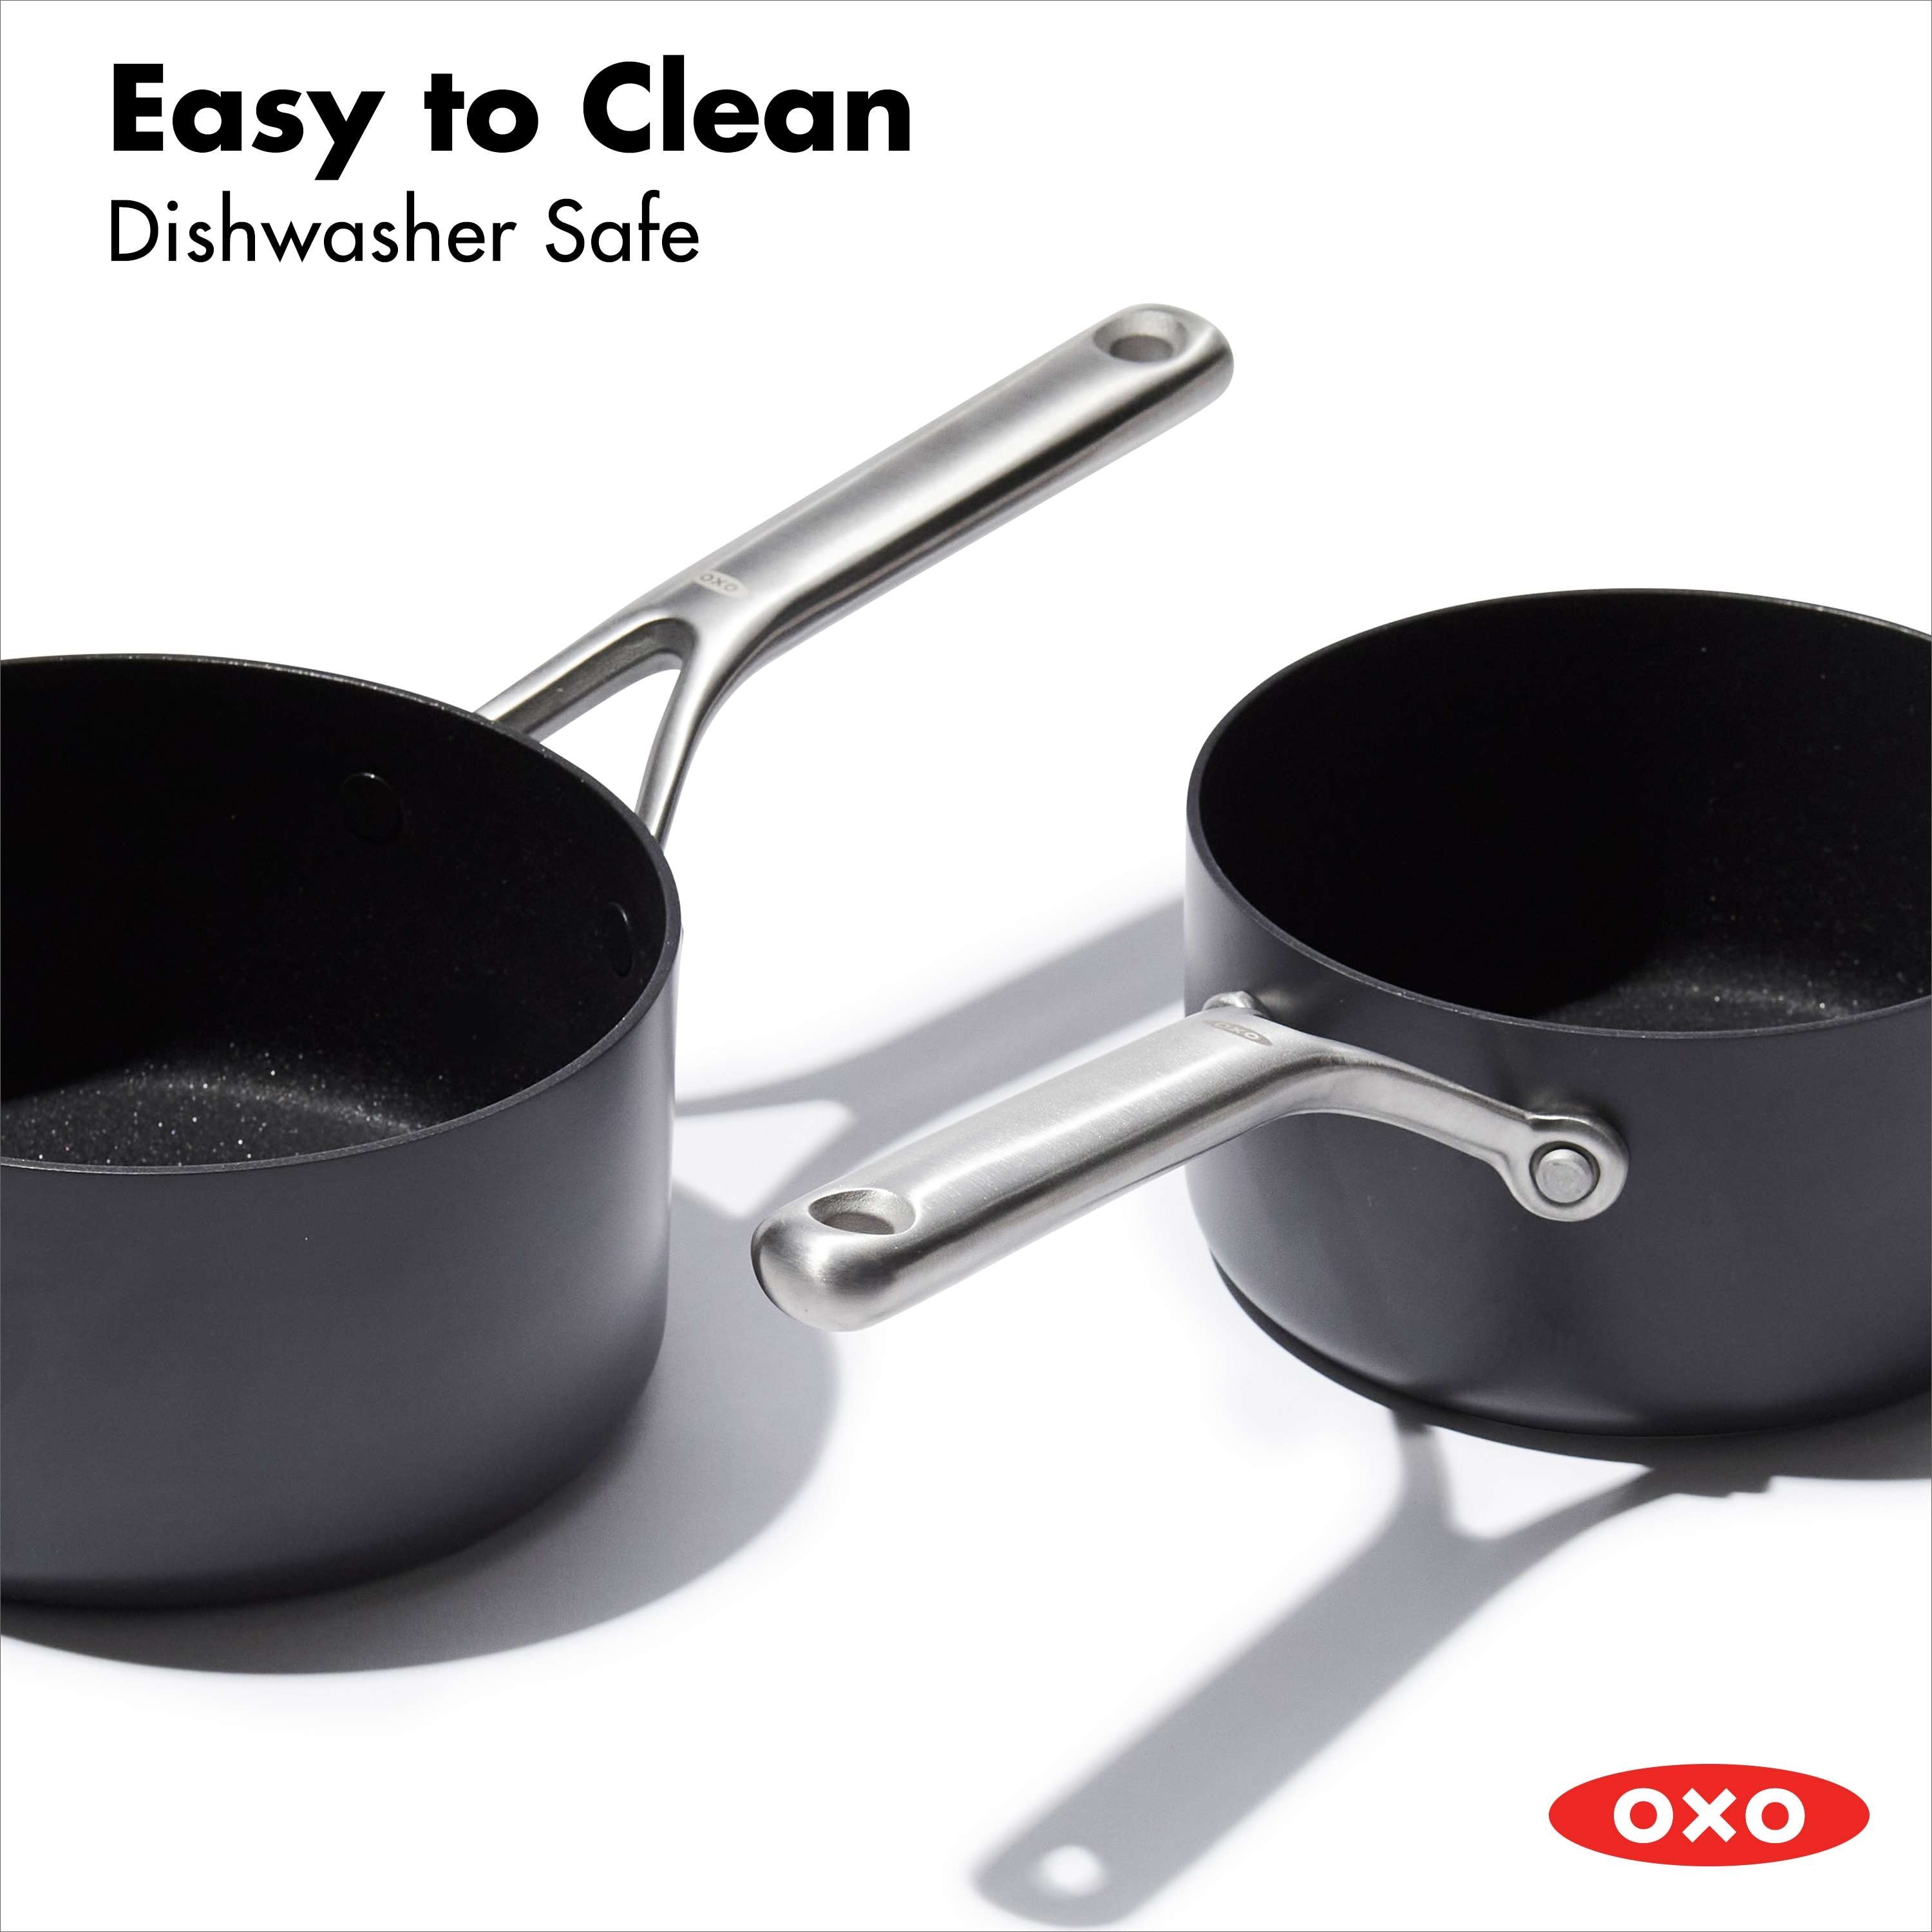 https://ak1.ostkcdn.com/images/products/is/images/direct/db51ffcff9ae98a65b3aa9c2725a9e6026606f72/OXO-Professional-Ceramic-Non-Stick-4-Piece-Saucepan-Set.jpg